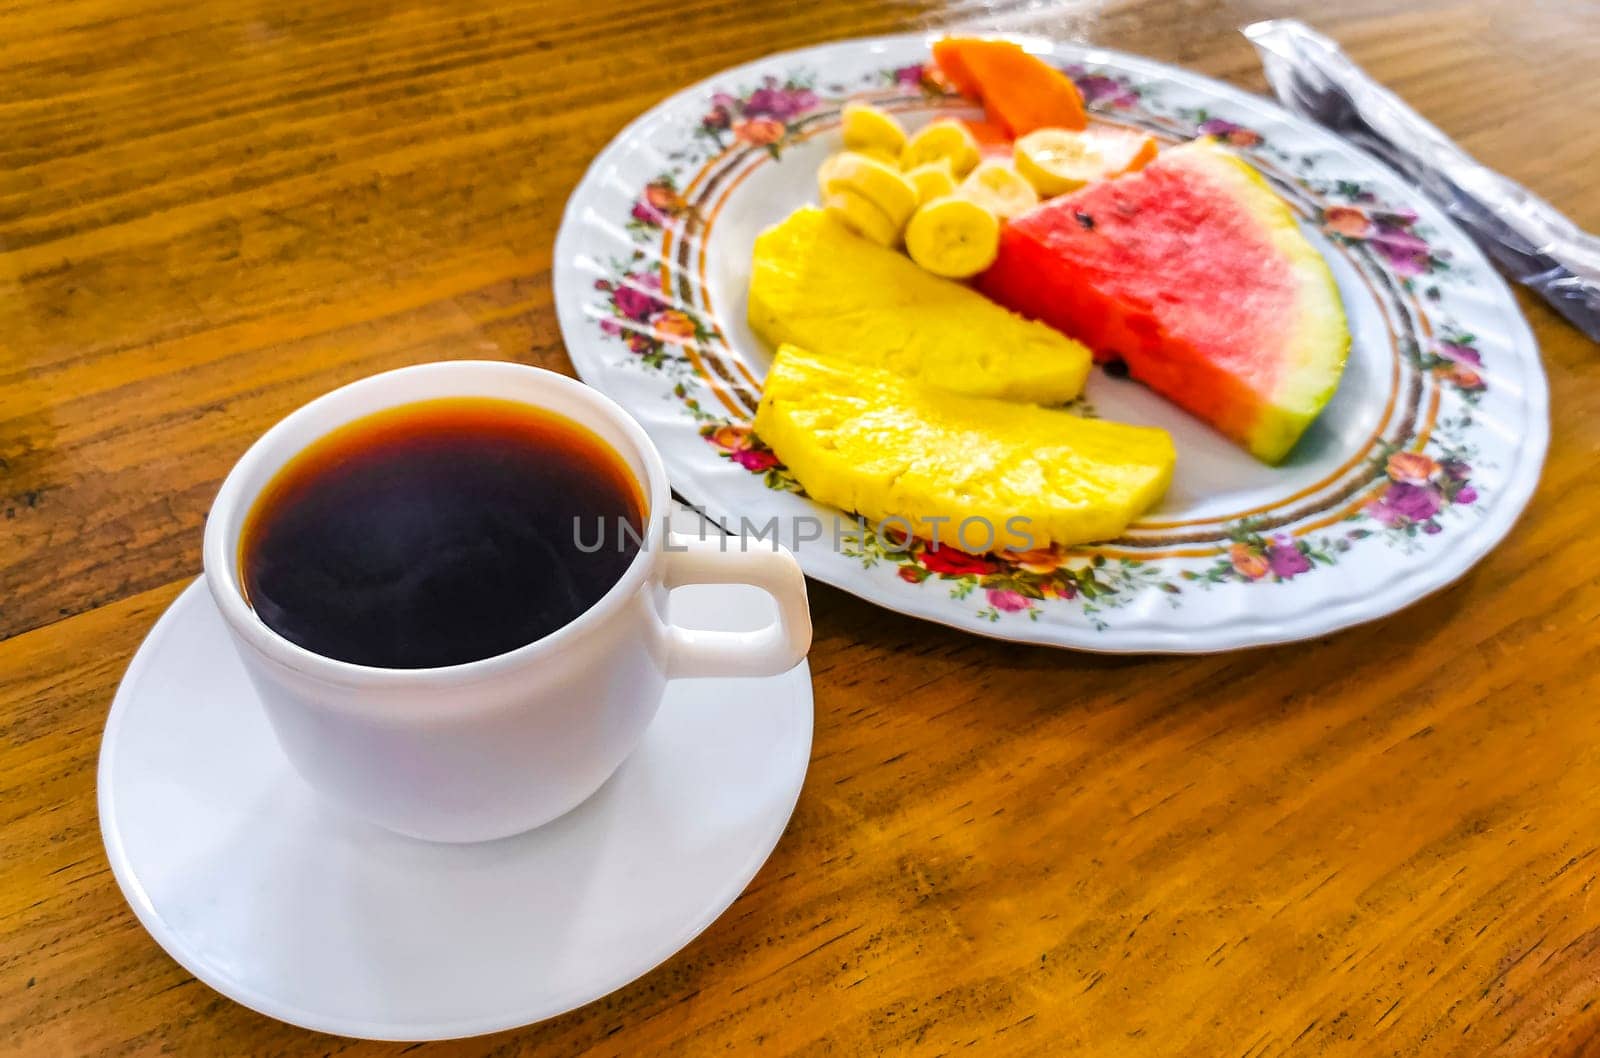 Plate with selected fruits and cup of coffee Costa Rica. by Arkadij